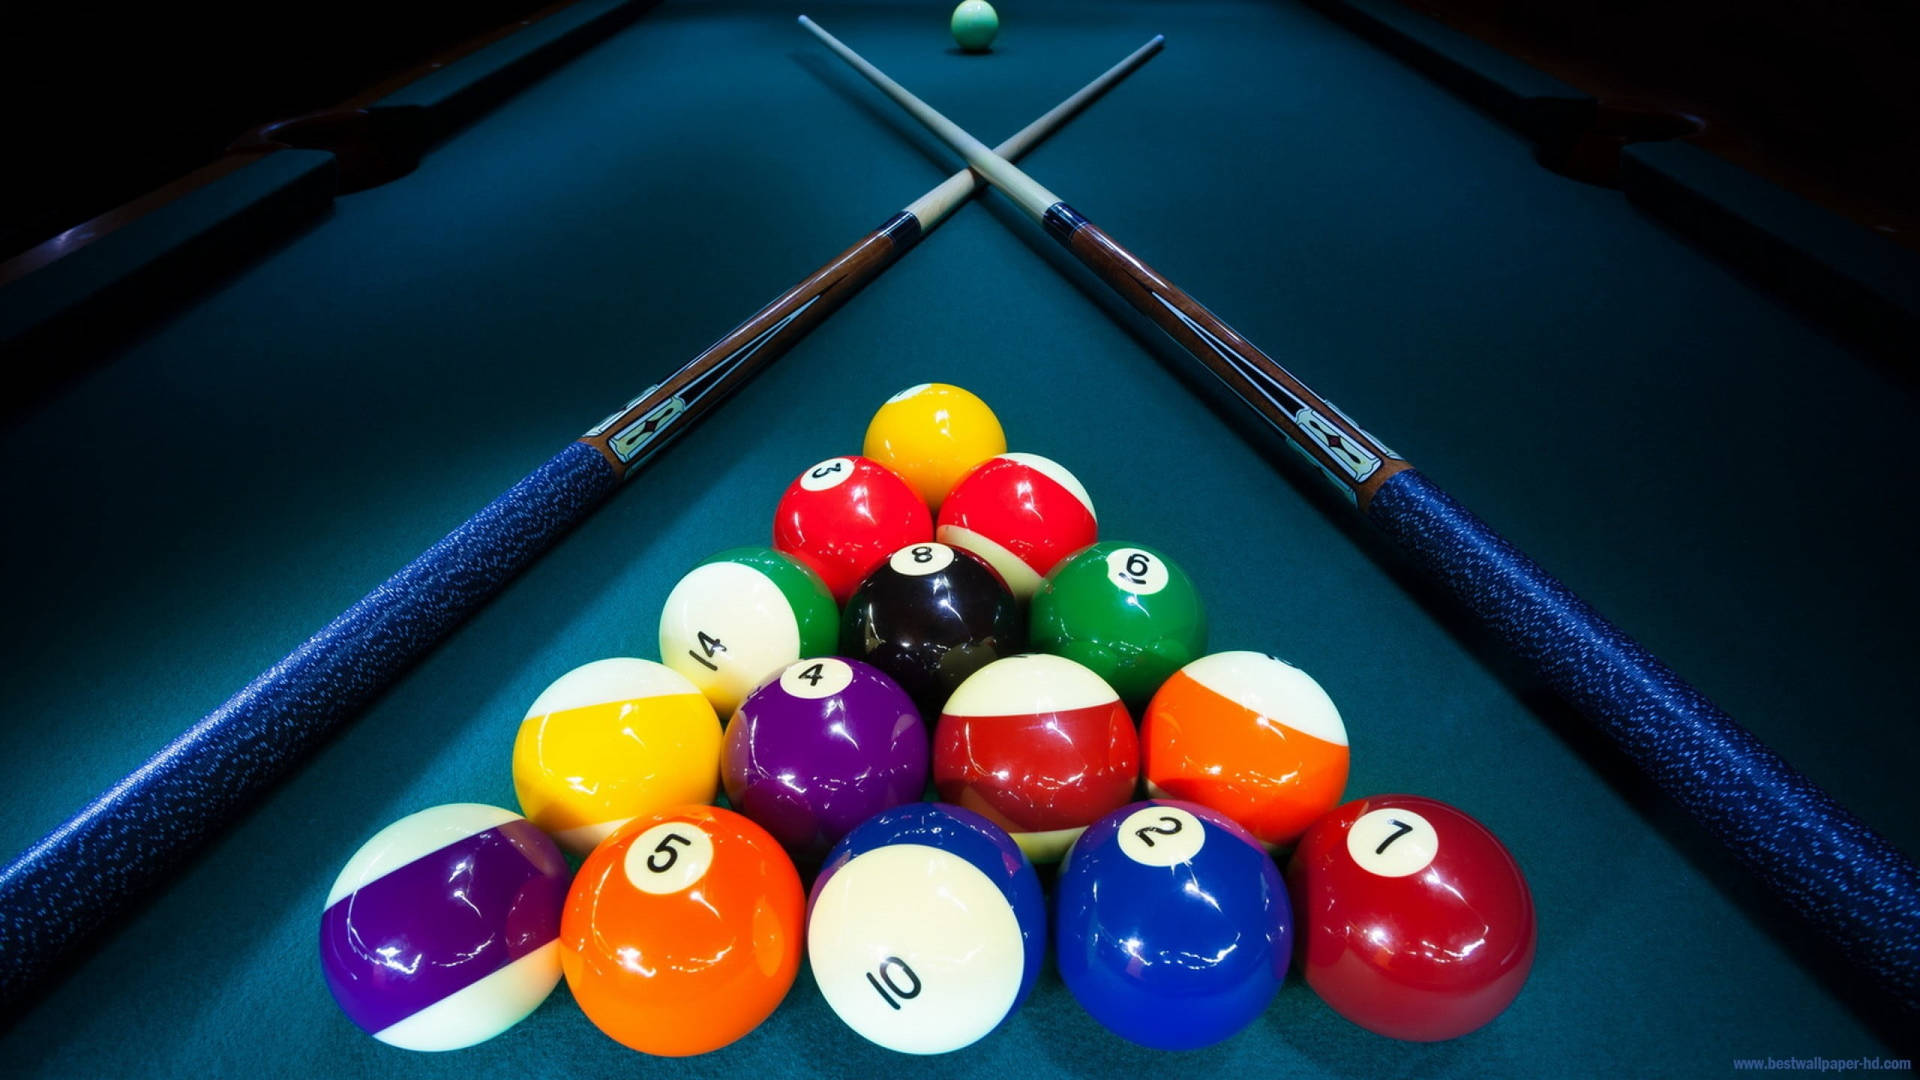 Competitive Billiard Match In Mid-play Background